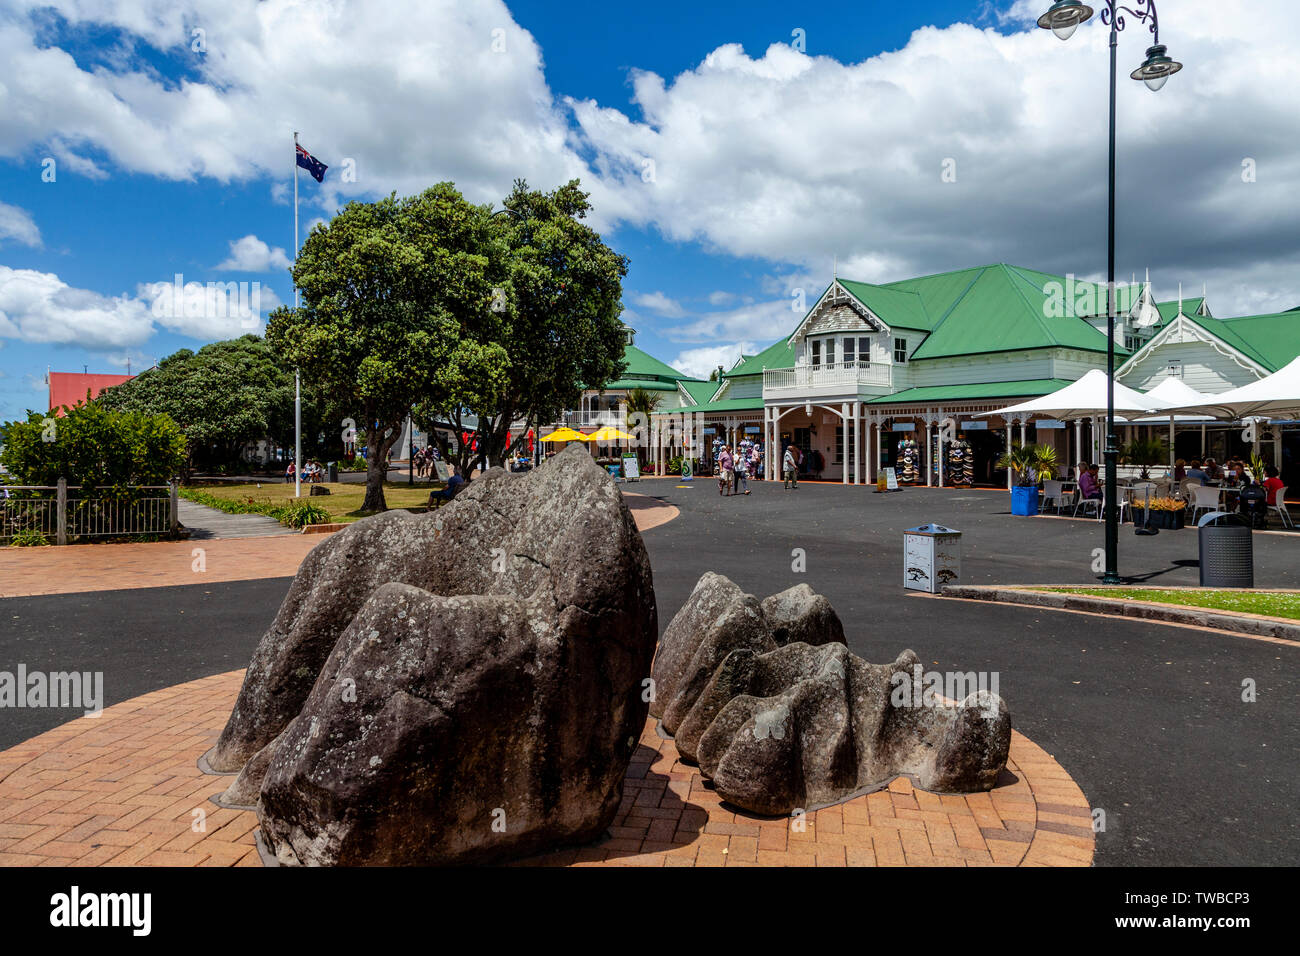 Cafes and Restaurants In The Town Basin, Whangarei, North Island, New Zealand Stock Photo